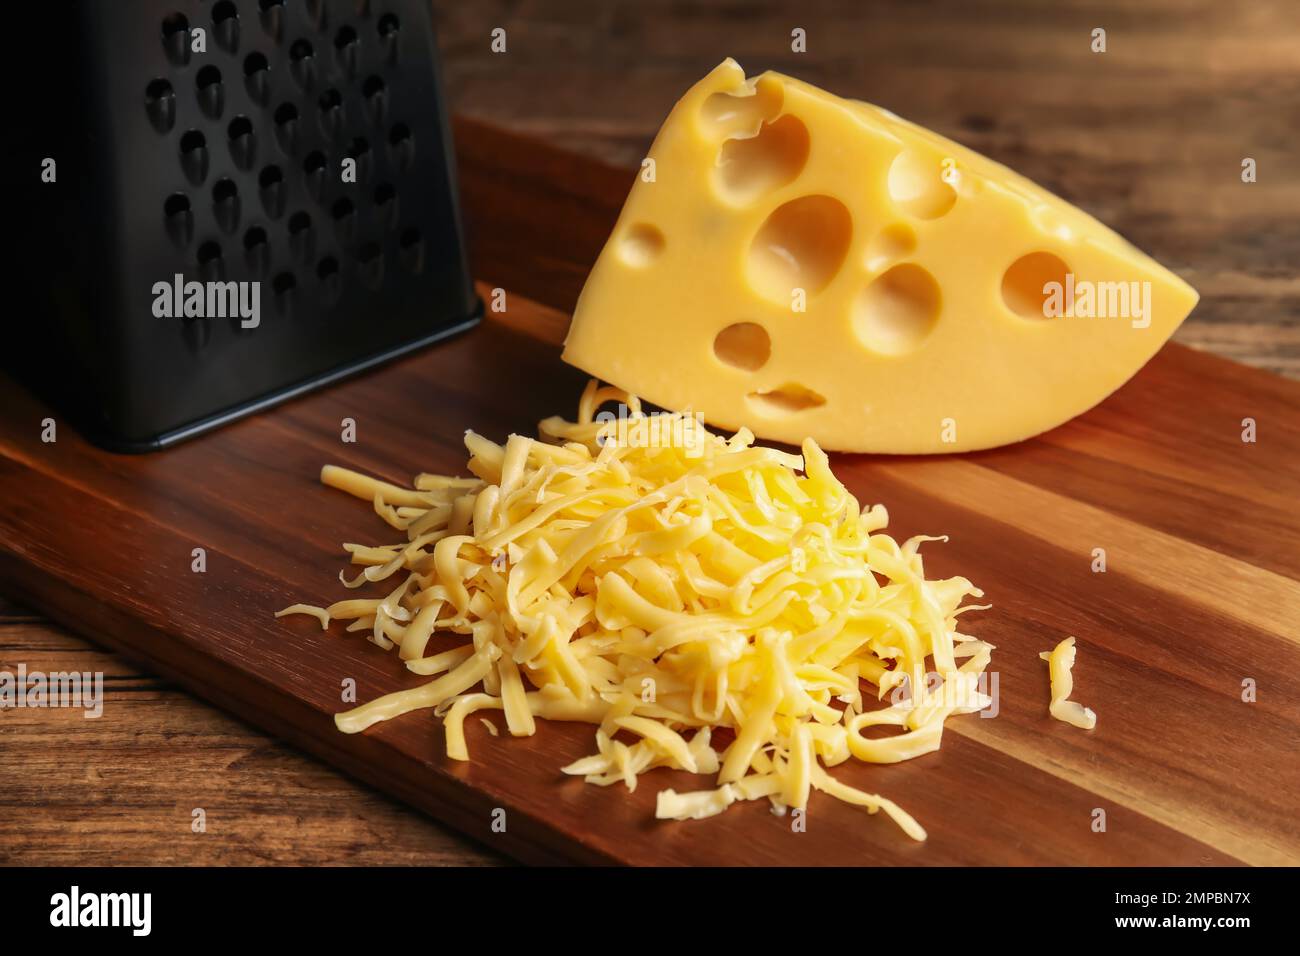 https://c8.alamy.com/comp/2MPBN7X/tasty-grated-and-whole-cheese-on-wooden-table-2MPBN7X.jpg